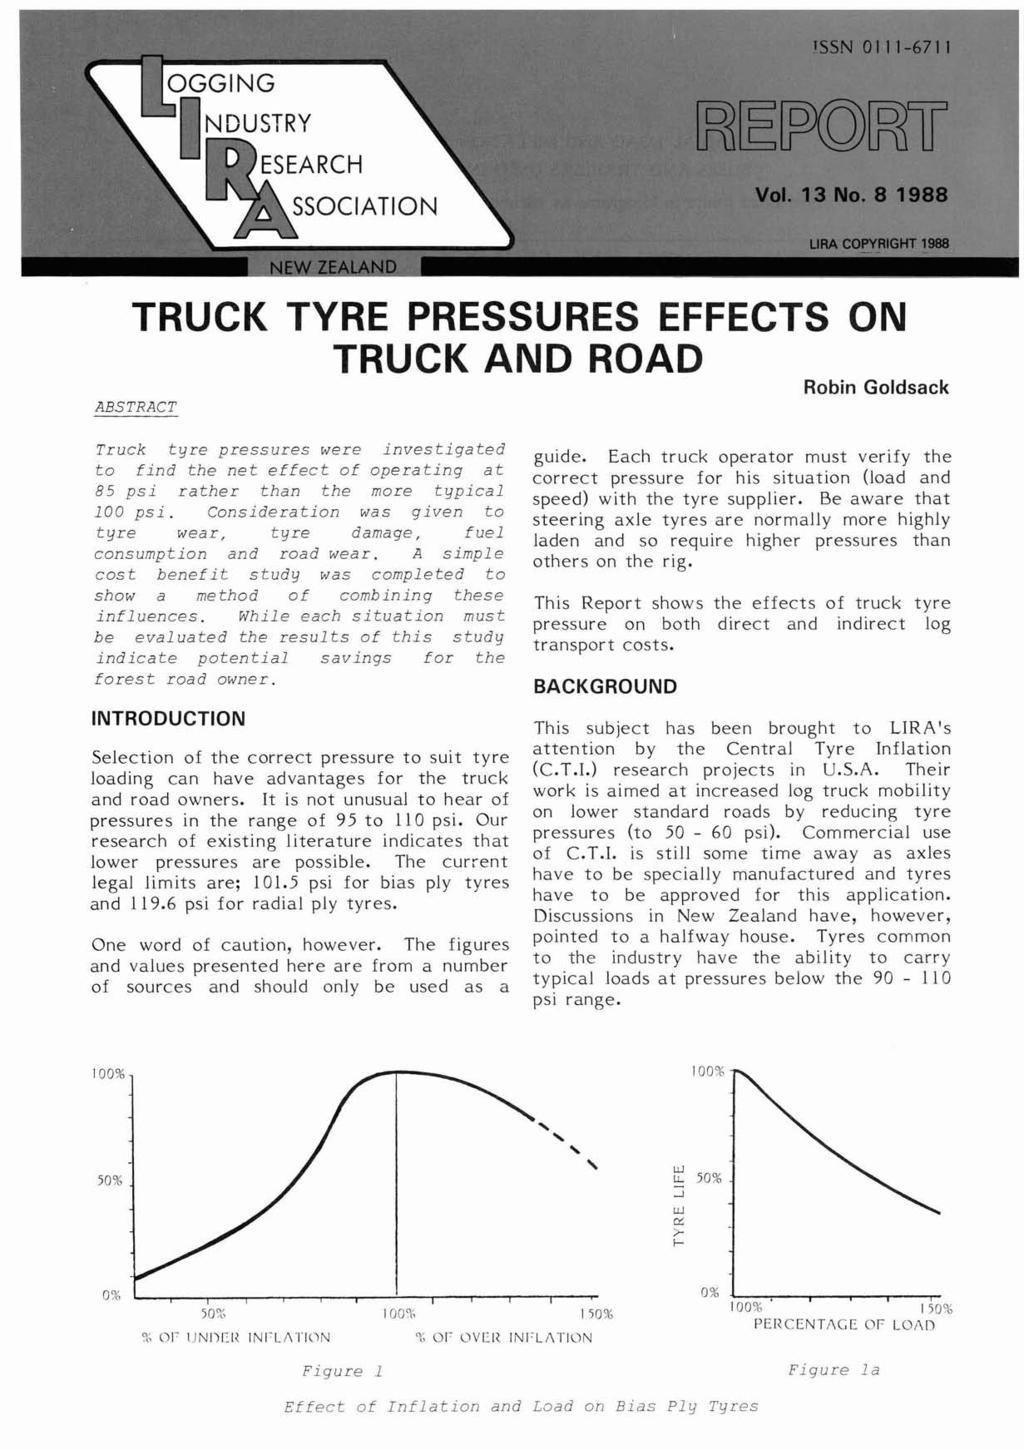 TRUCK TYRE PRESSURES EFFECTS ON TRUCK AND ROAD Robin Goldsack ABSTRACT Truck tyre pressures were investigated to find the net effect of operating at 85 psi rather than the more typical 100 psi.